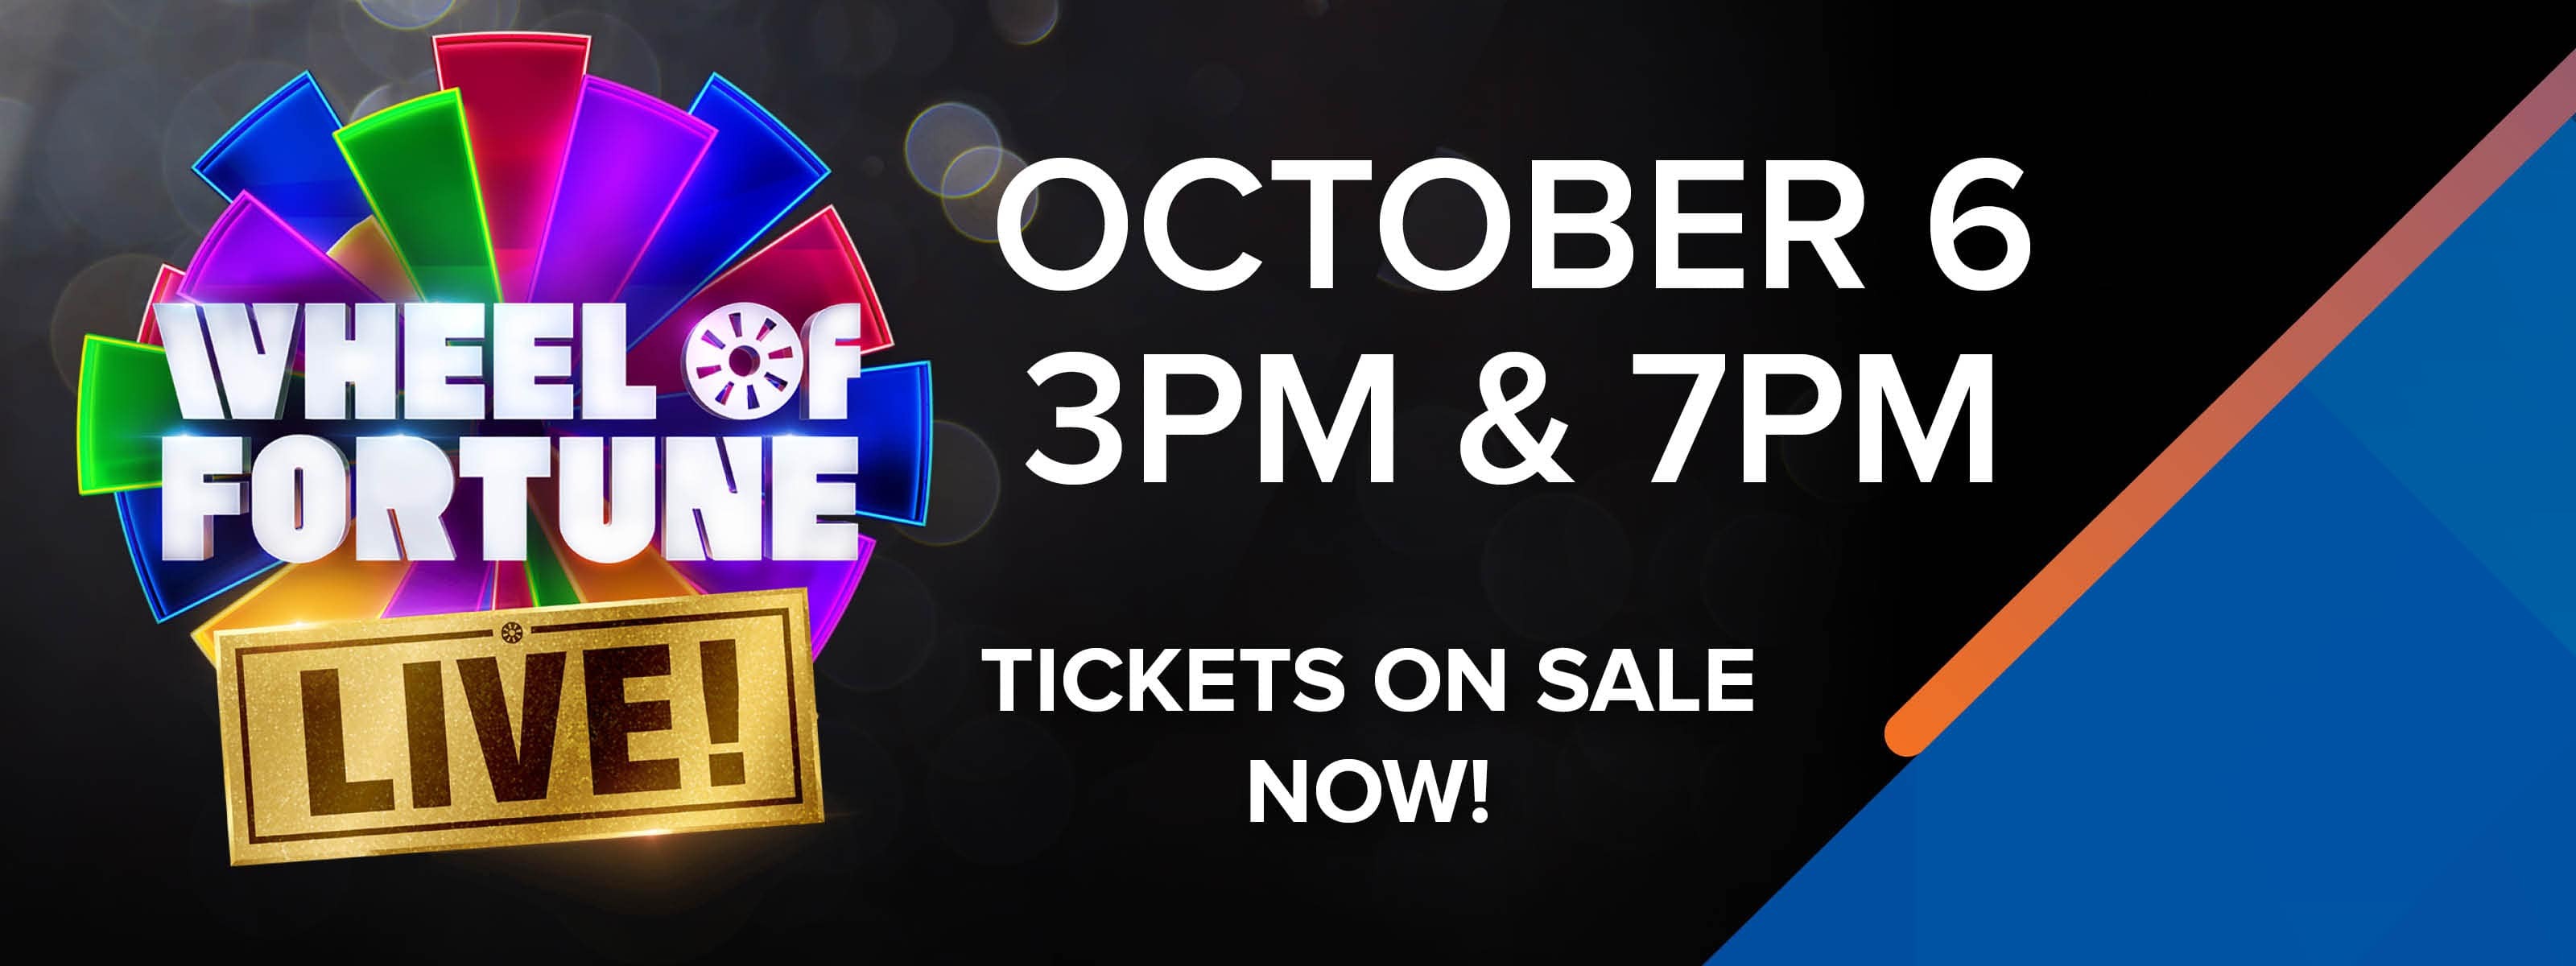 Wheel of Fortune LIVE! October 6, 3 and 7pm - Tickets On Sale Now